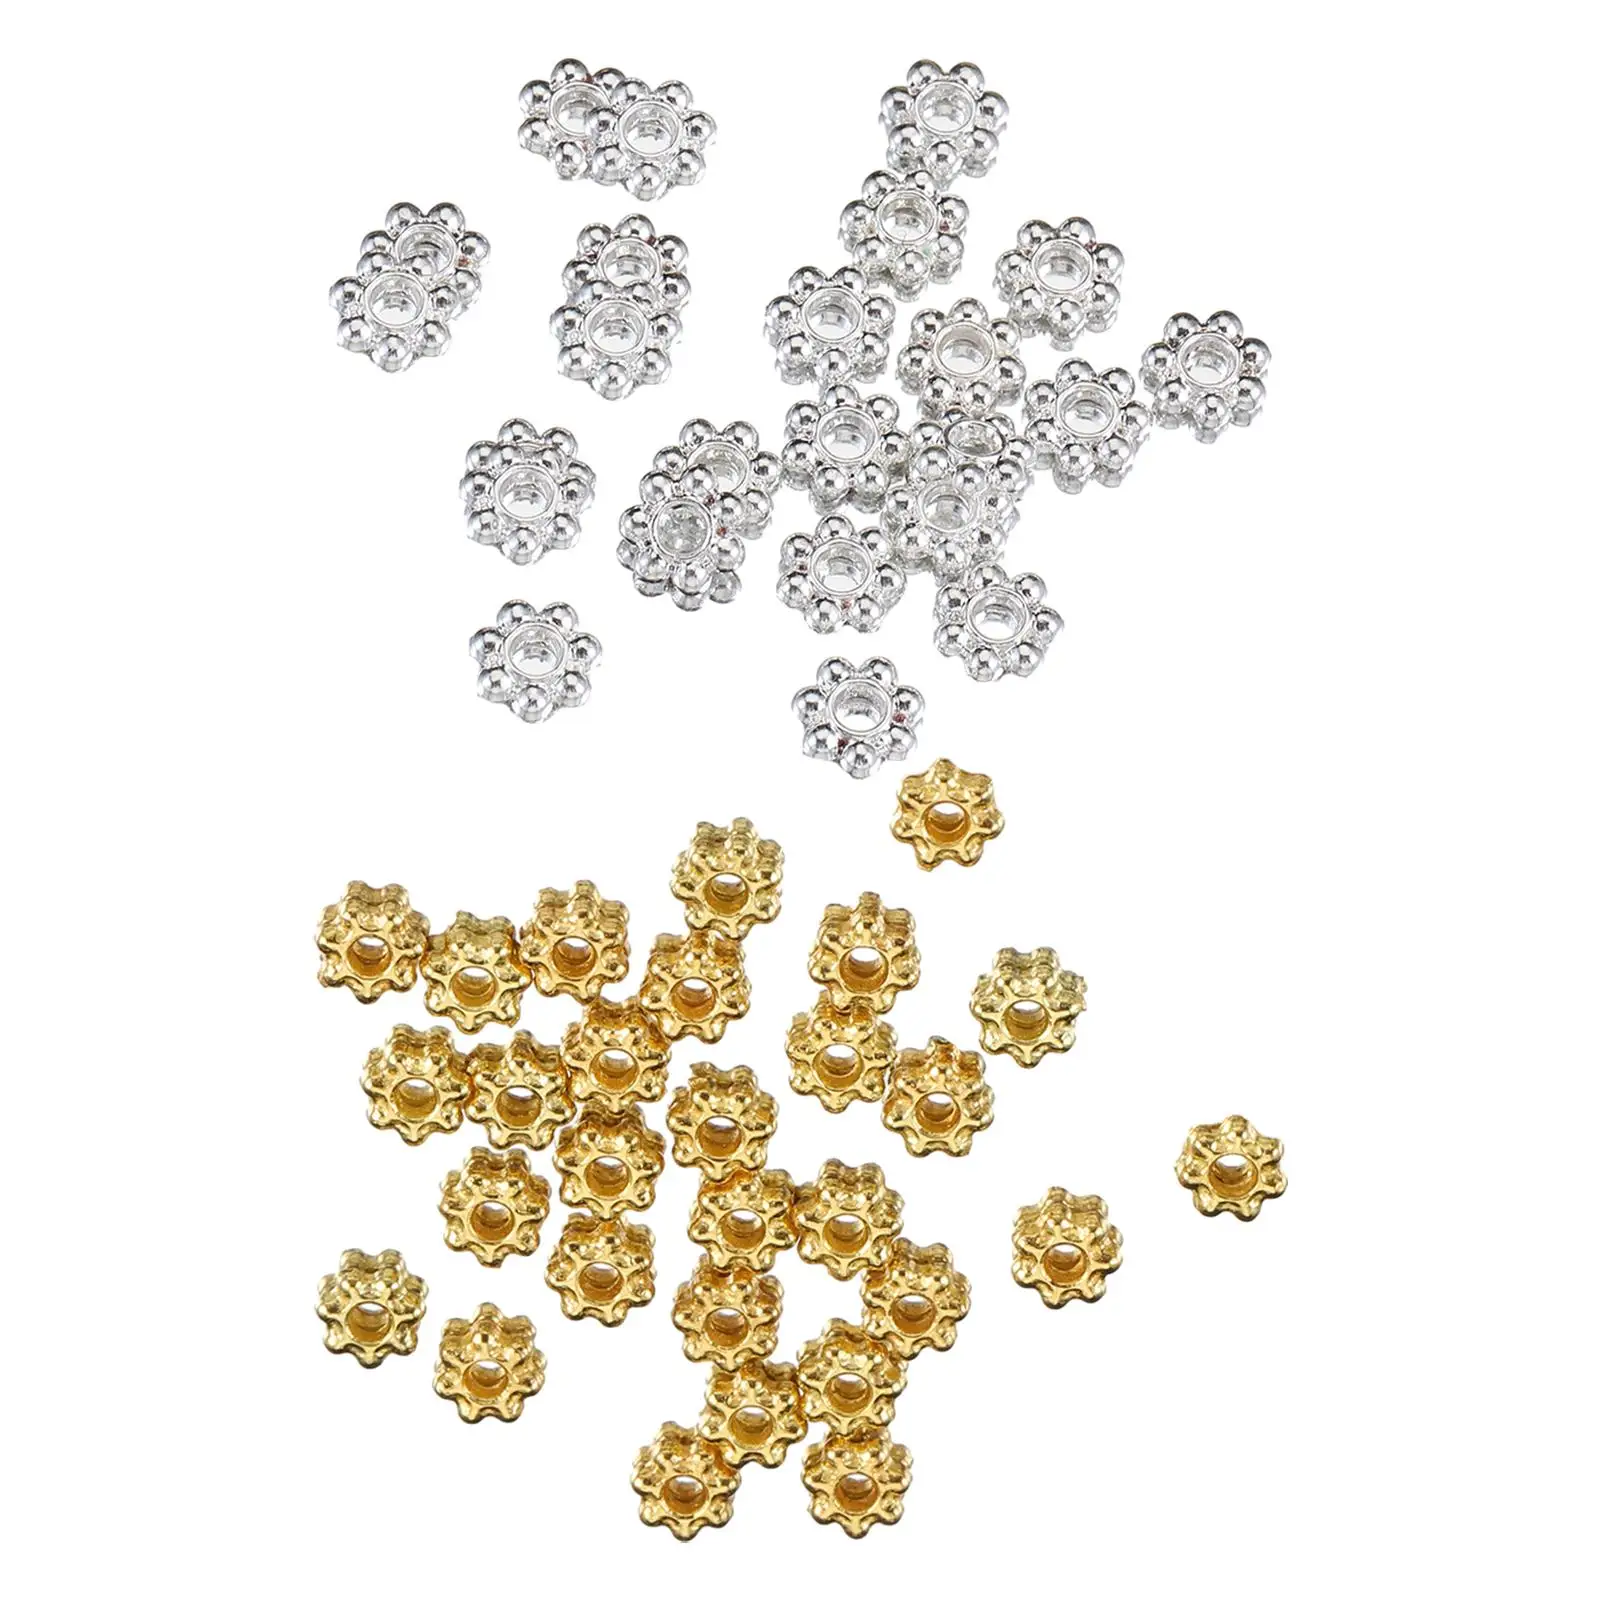 200Pcs Snowflake Spacer Beads Set DIY Snowflake Beads Loose Beads for Jewelry Making Findings Headband Clothes Necklace Pendants